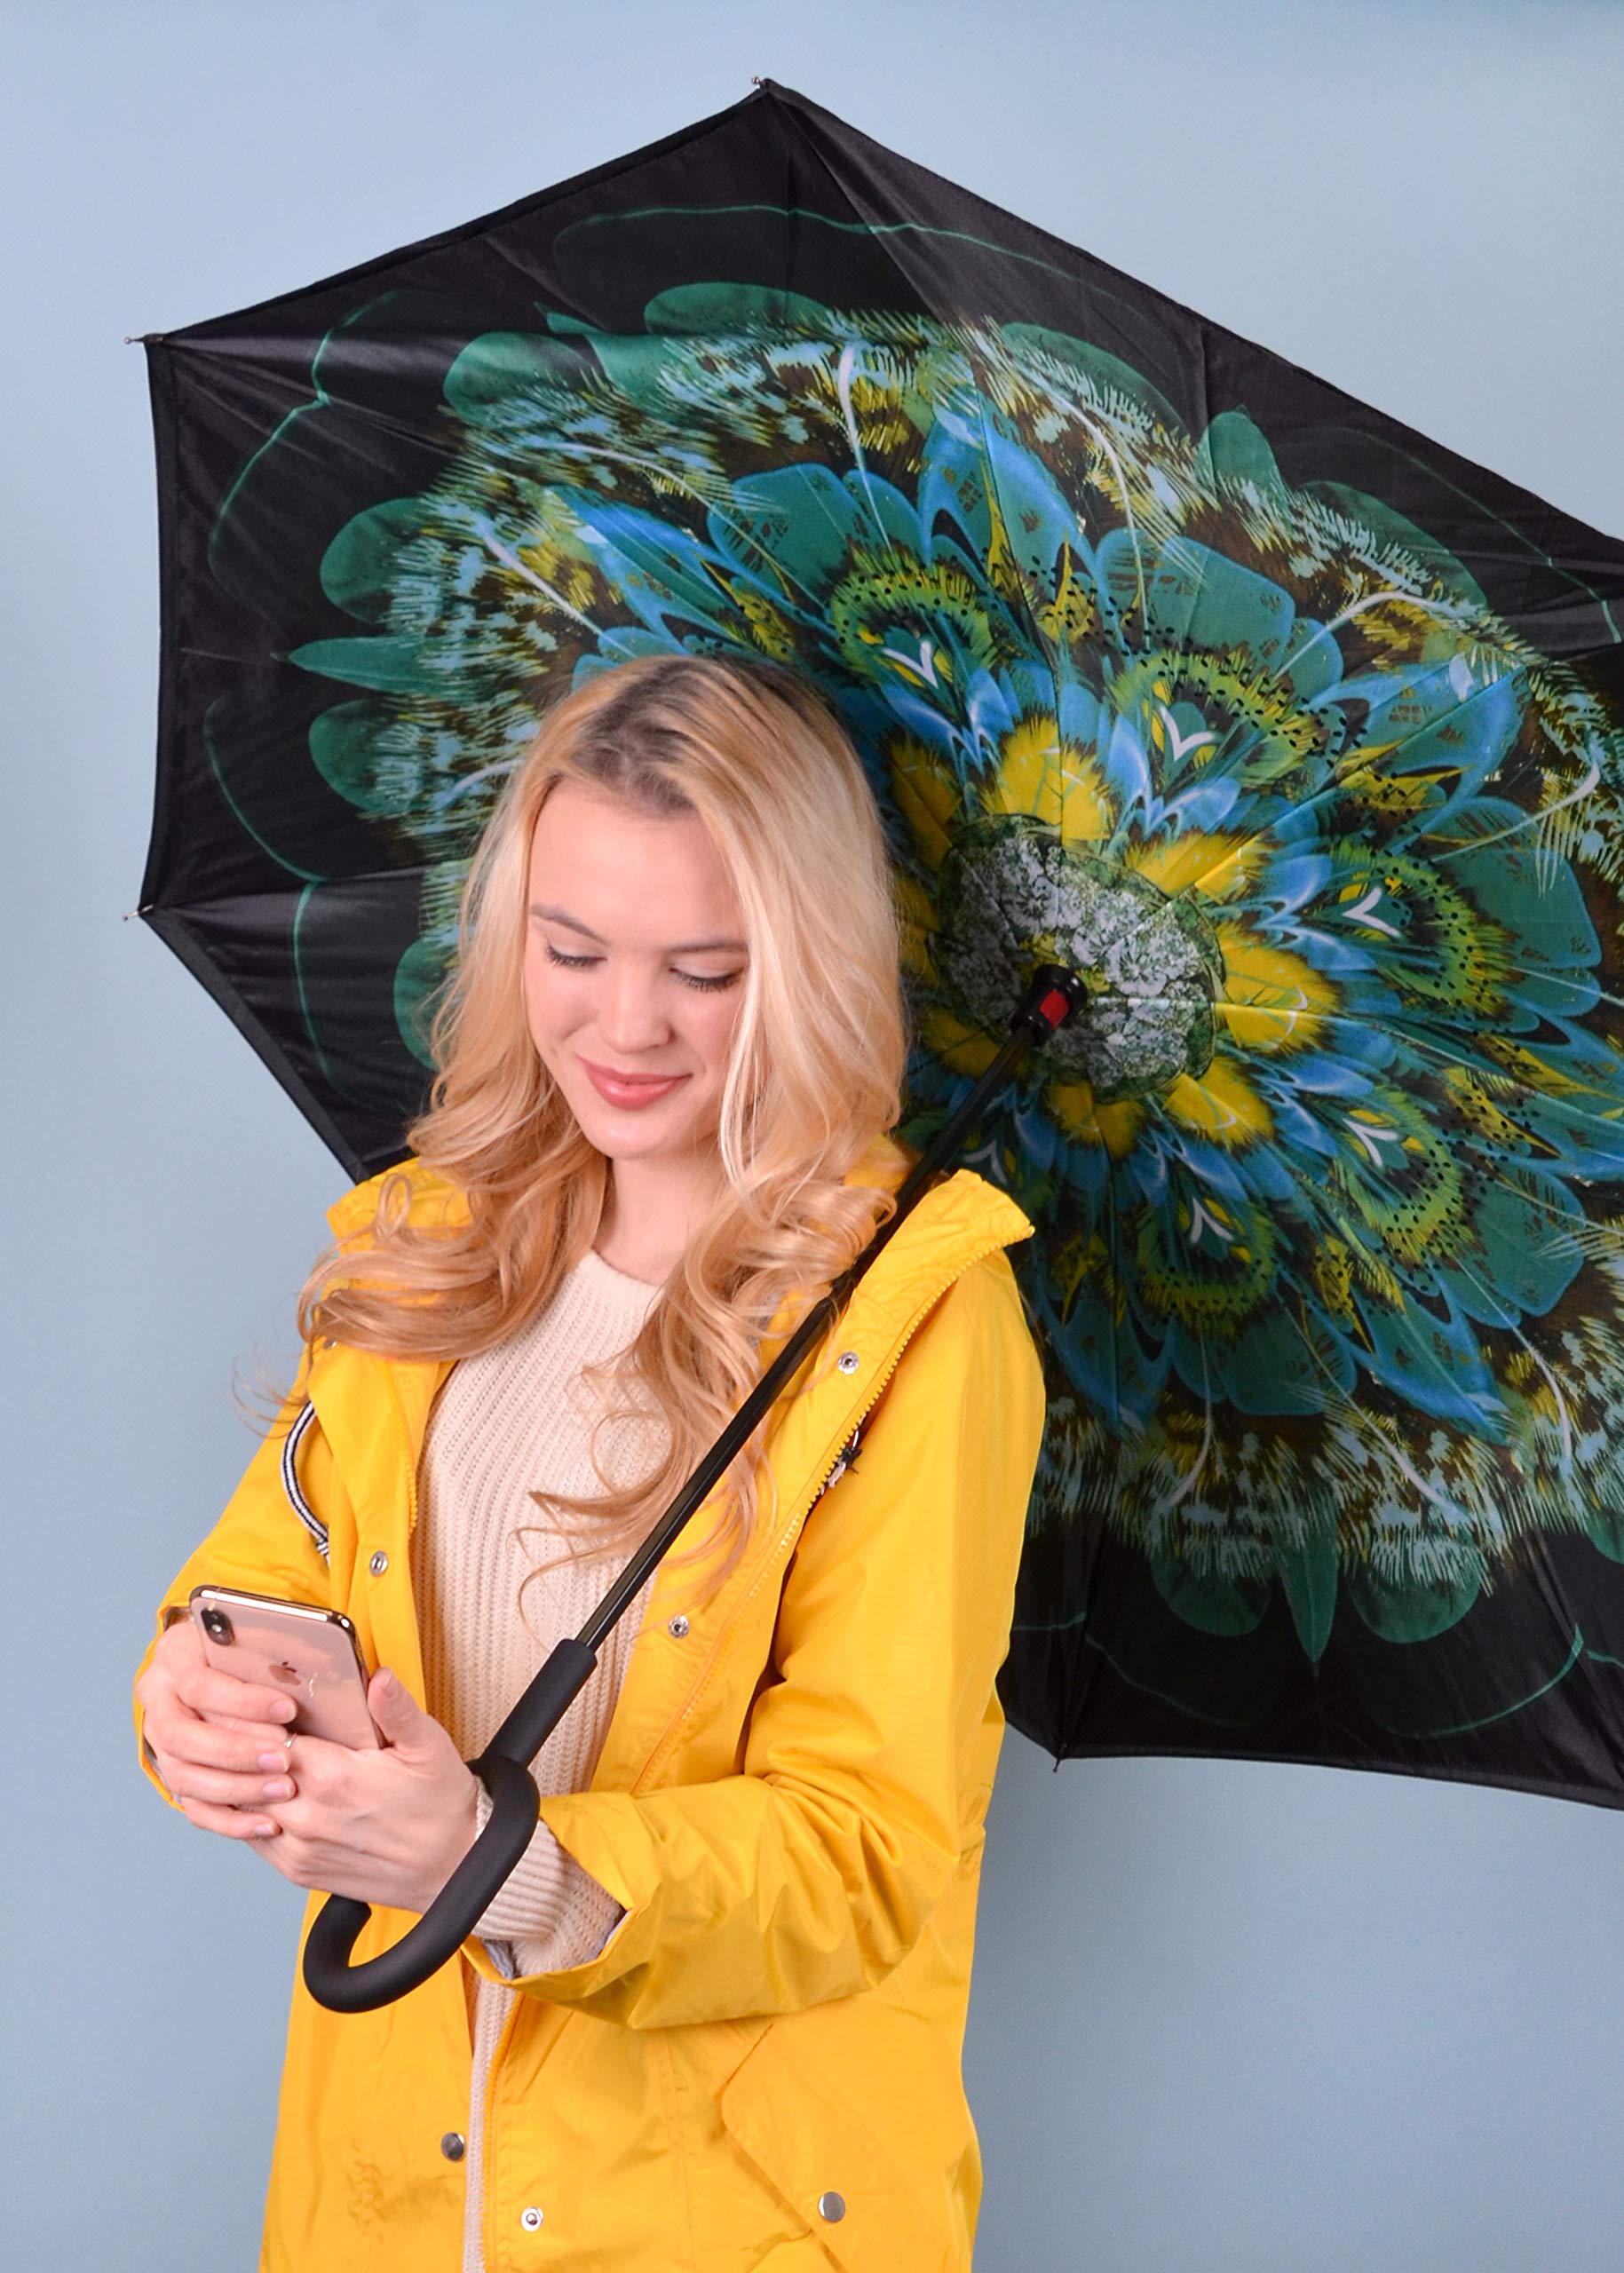 Parquet Peacock Double Layer Inverted Umbrellas - C Shaped Handle Reverse Folding Windproof Umbrella for Men and Women